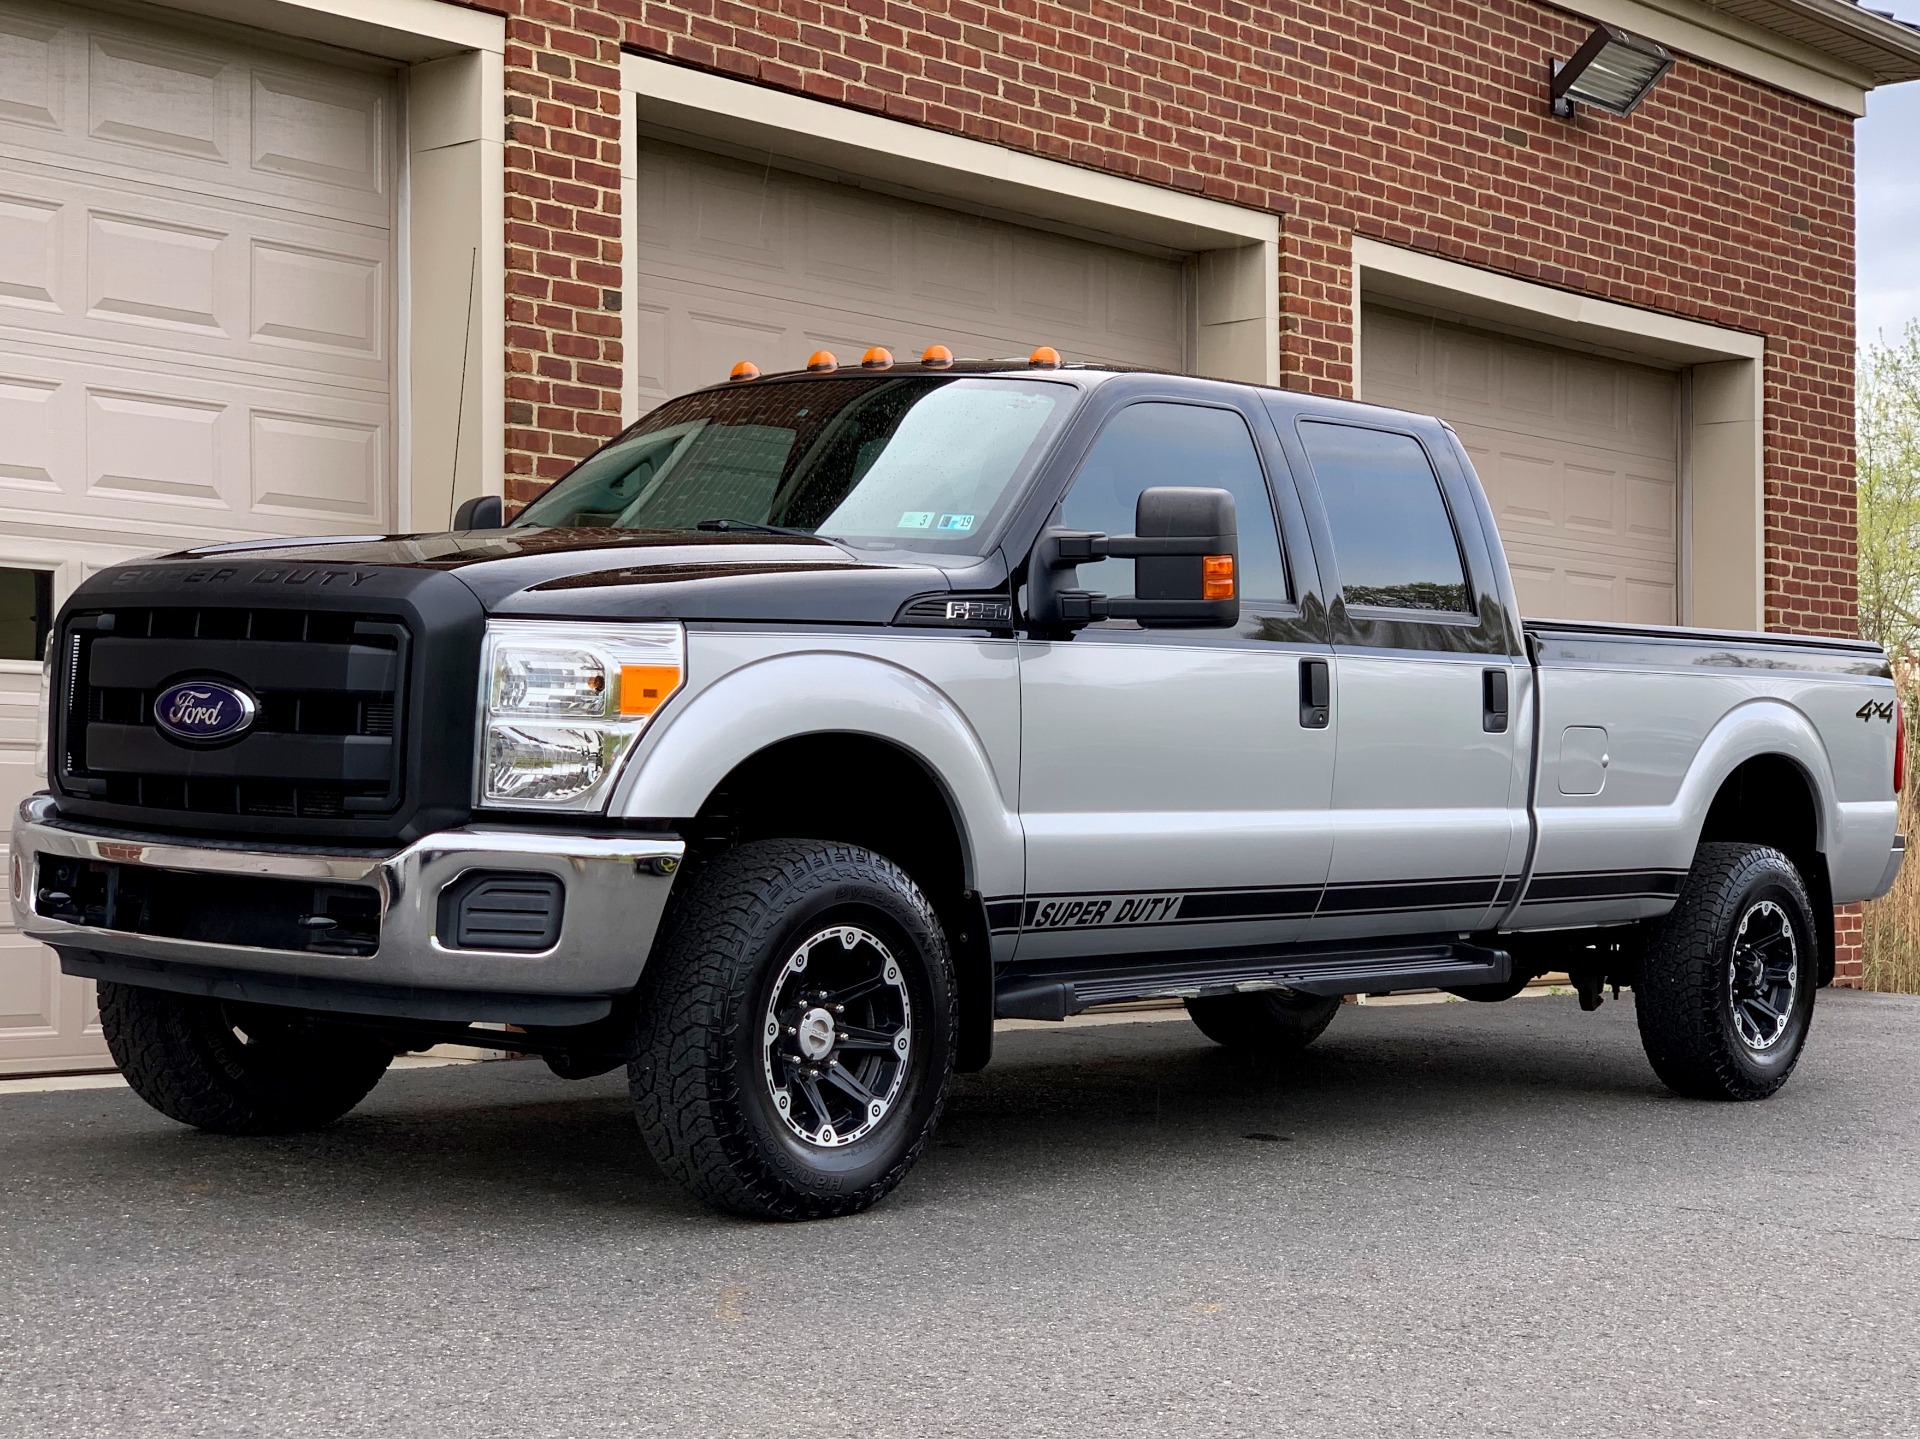 2012 Ford F-250 Super Duty XL 4X4 Stock # A75664 for sale near Edgewater Park, NJ | NJ Ford Dealer 2012 Ford F 250 Wiper Blade Size